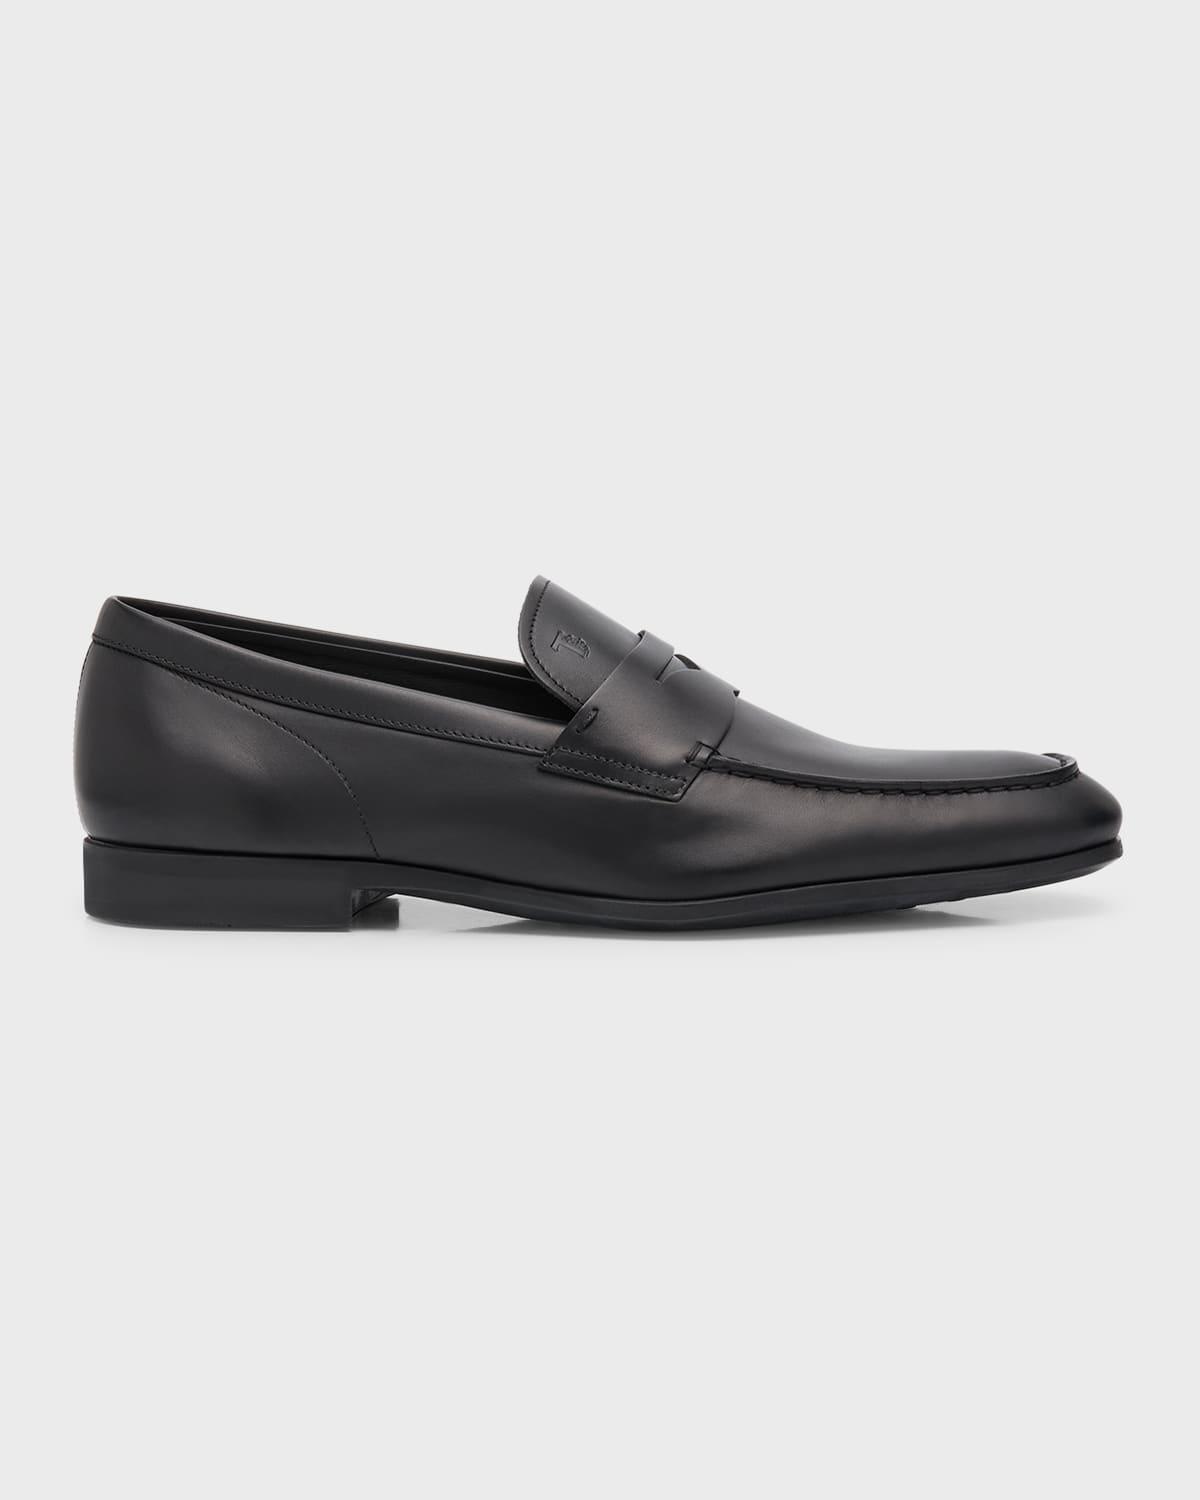 Tods Loafers Brown 8, 5 Product Image